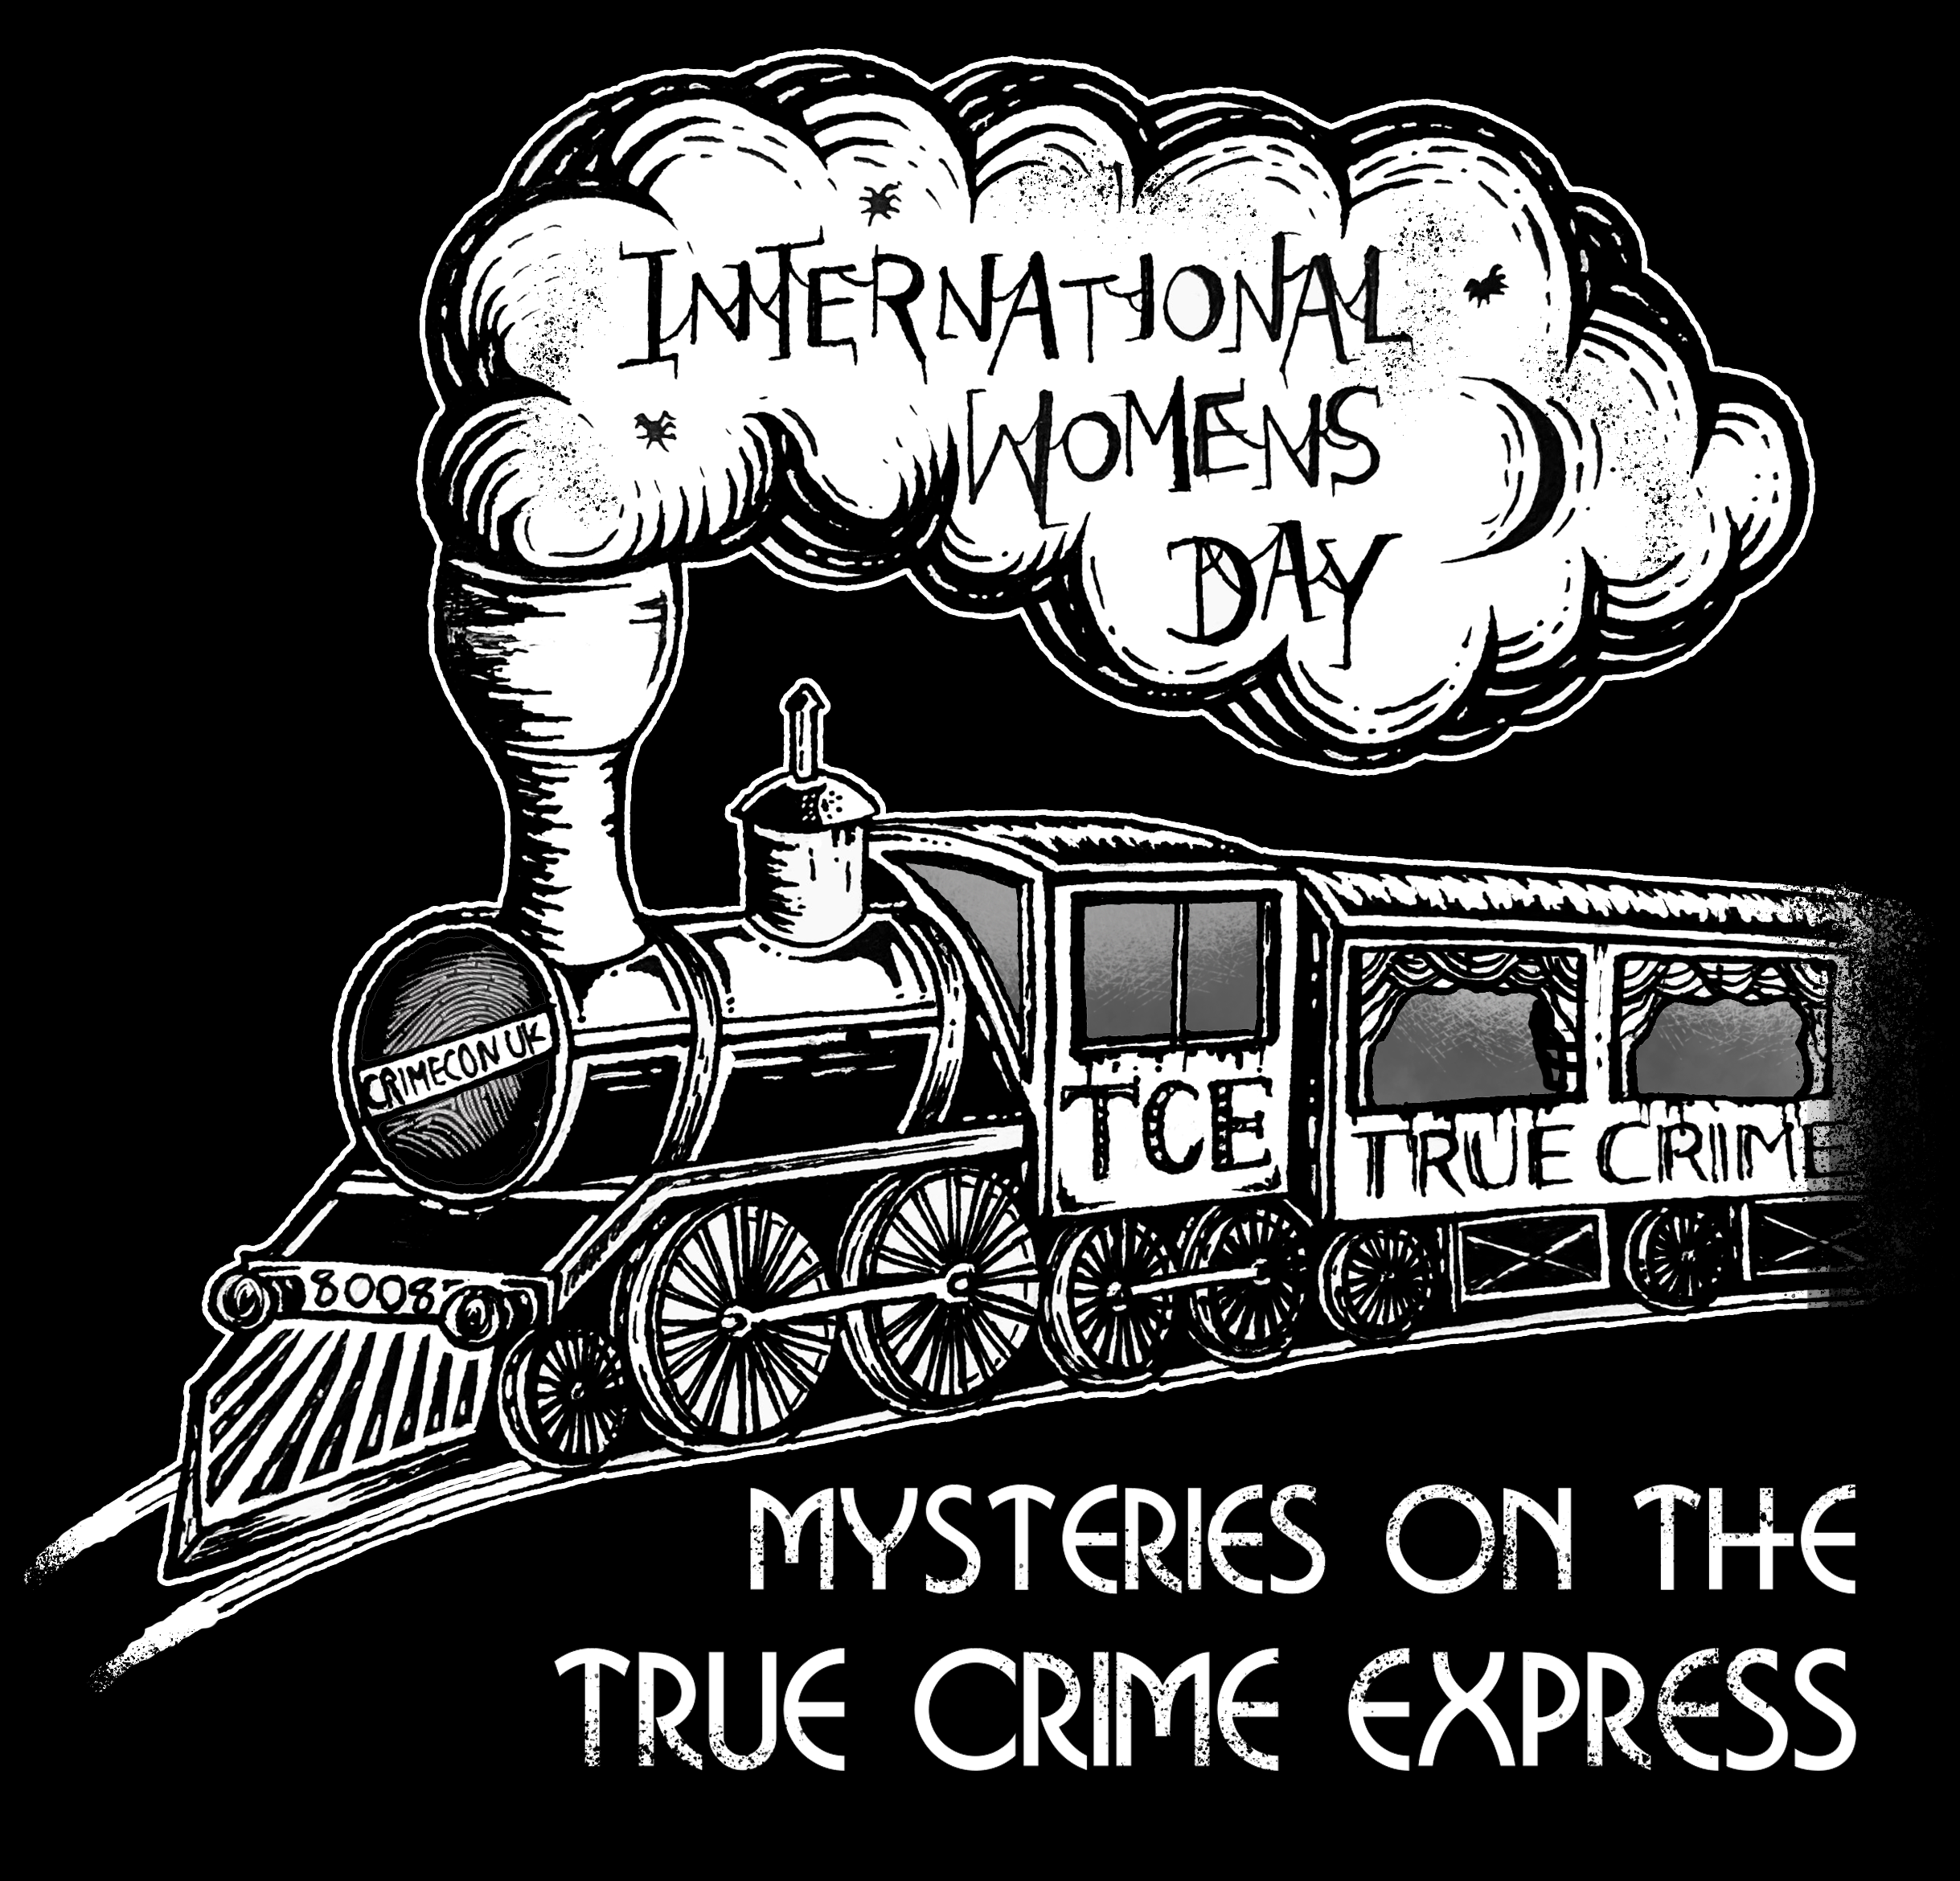 S8: Mysteries on the True Crime Express